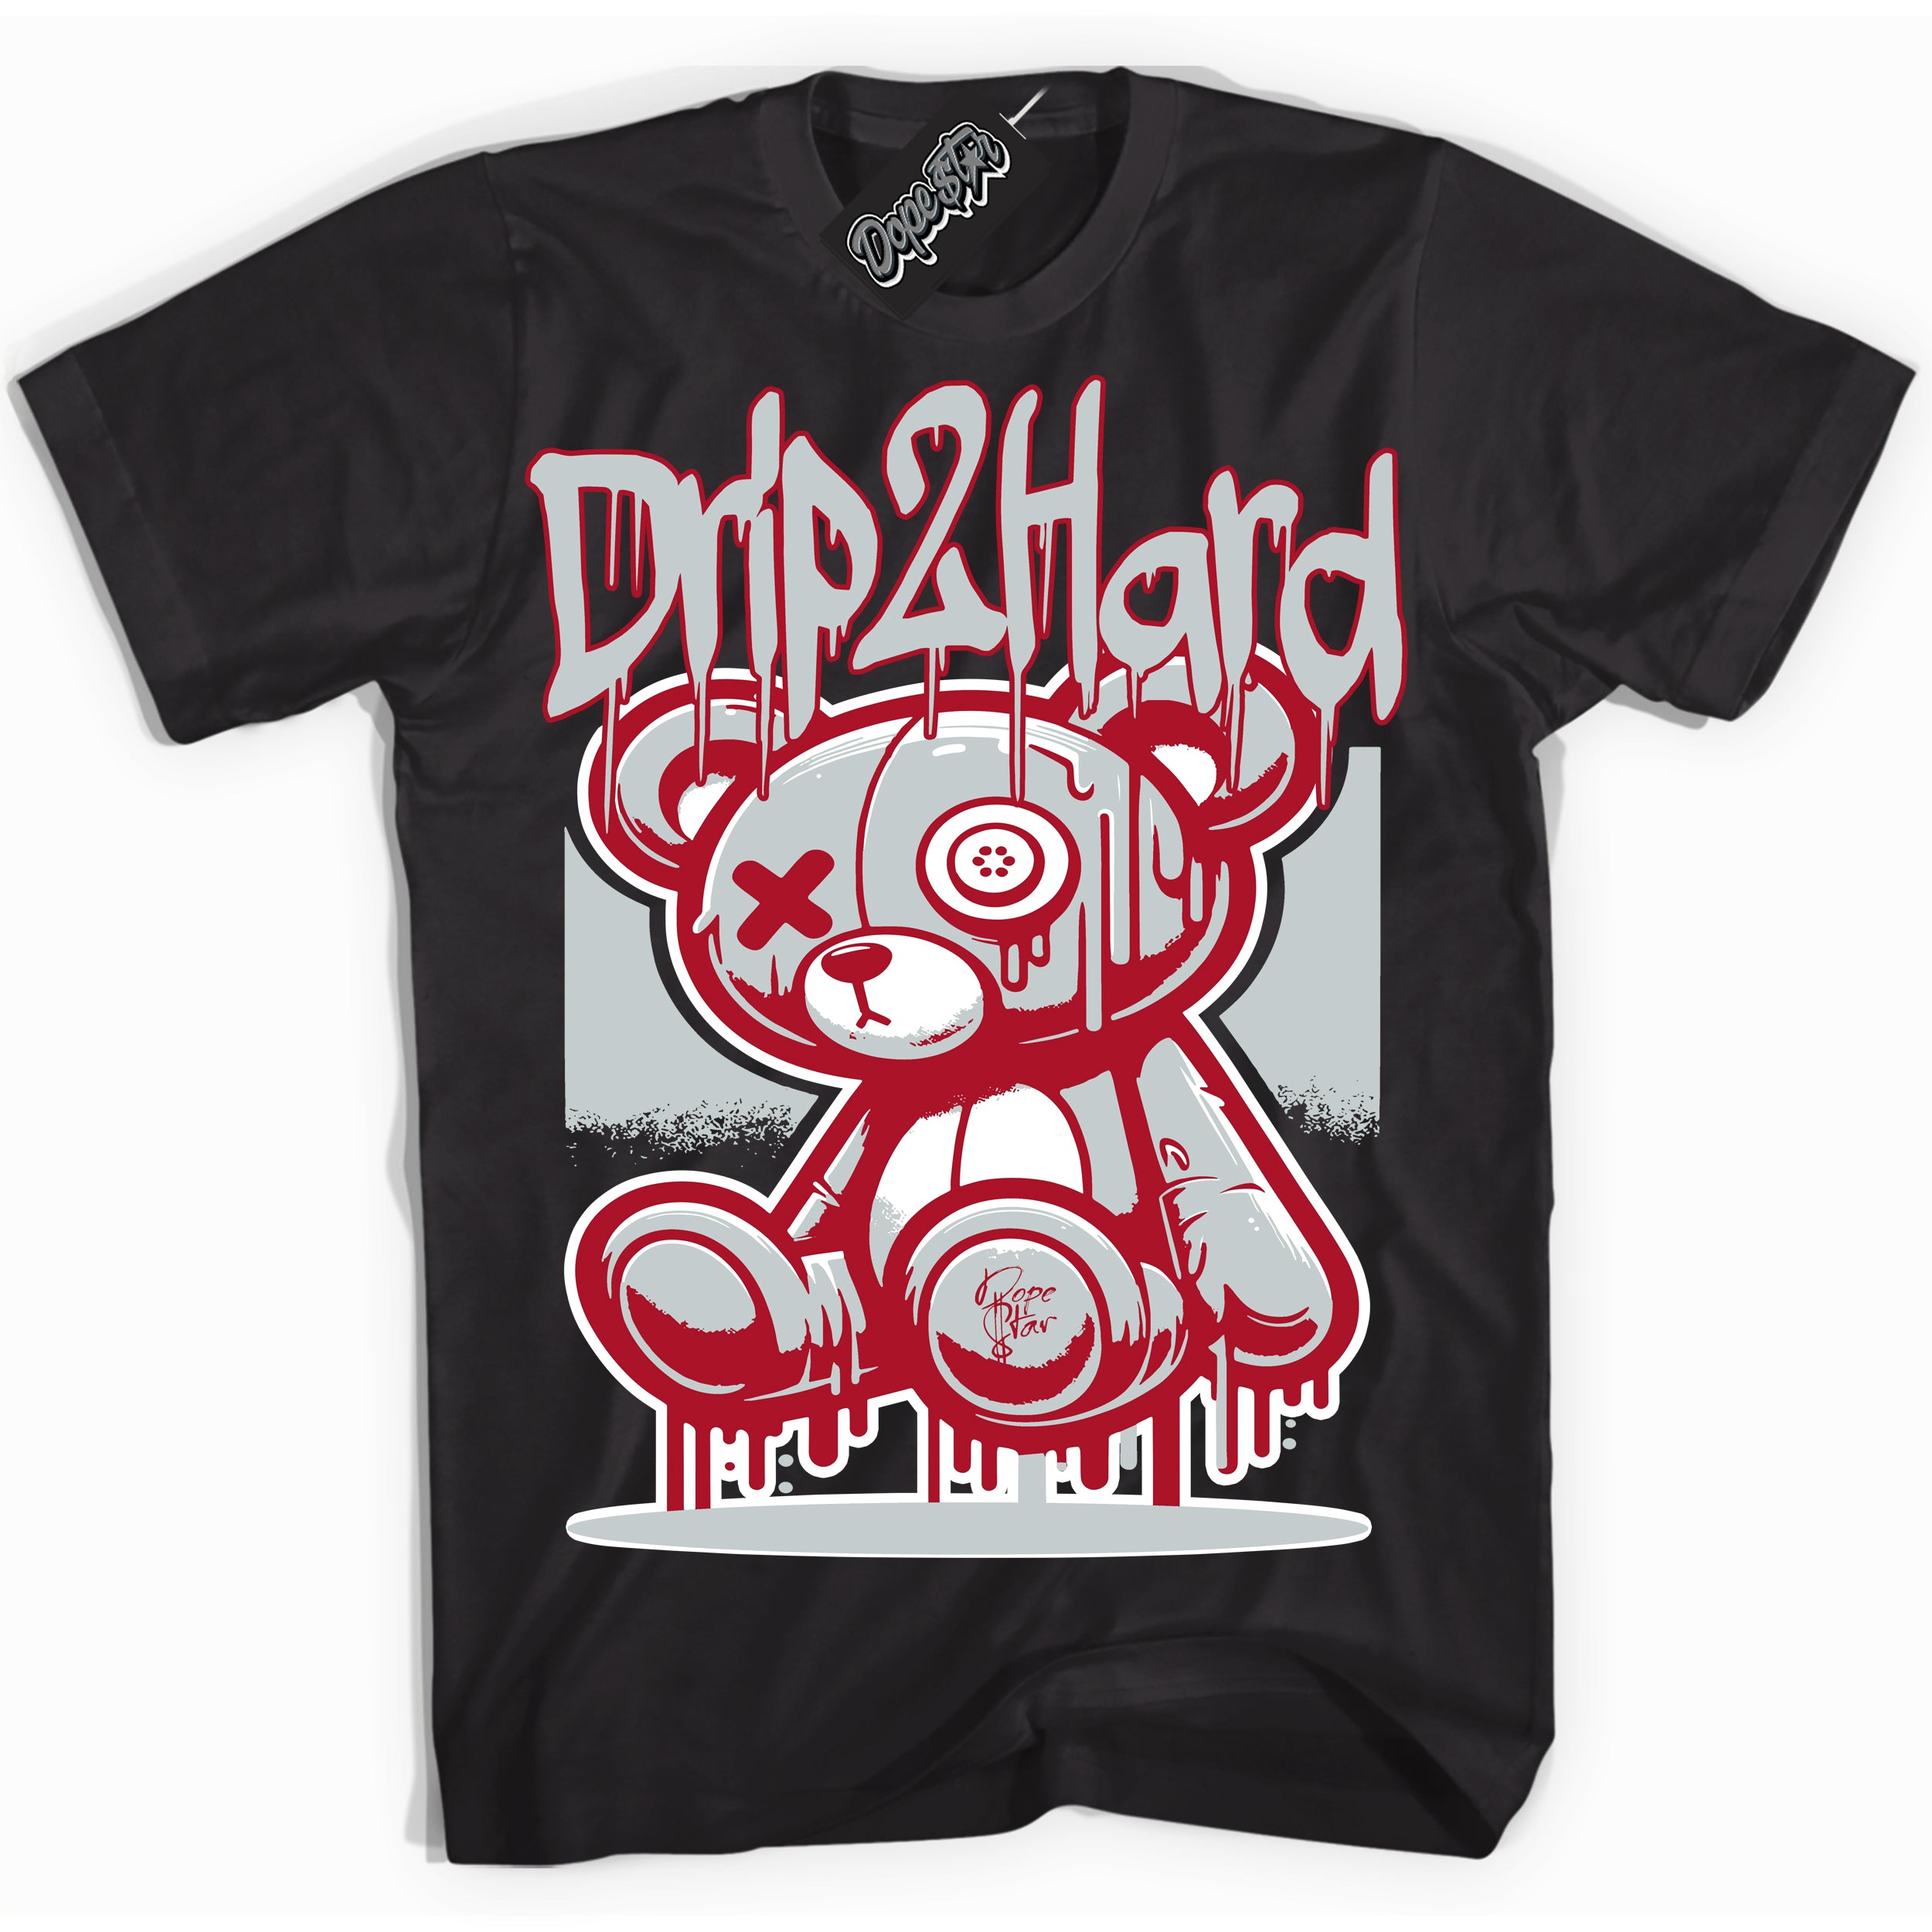 Cool Black Shirt with “ Drip 2 Hard” design that perfectly matches Reverse Ultraman Sneakers.